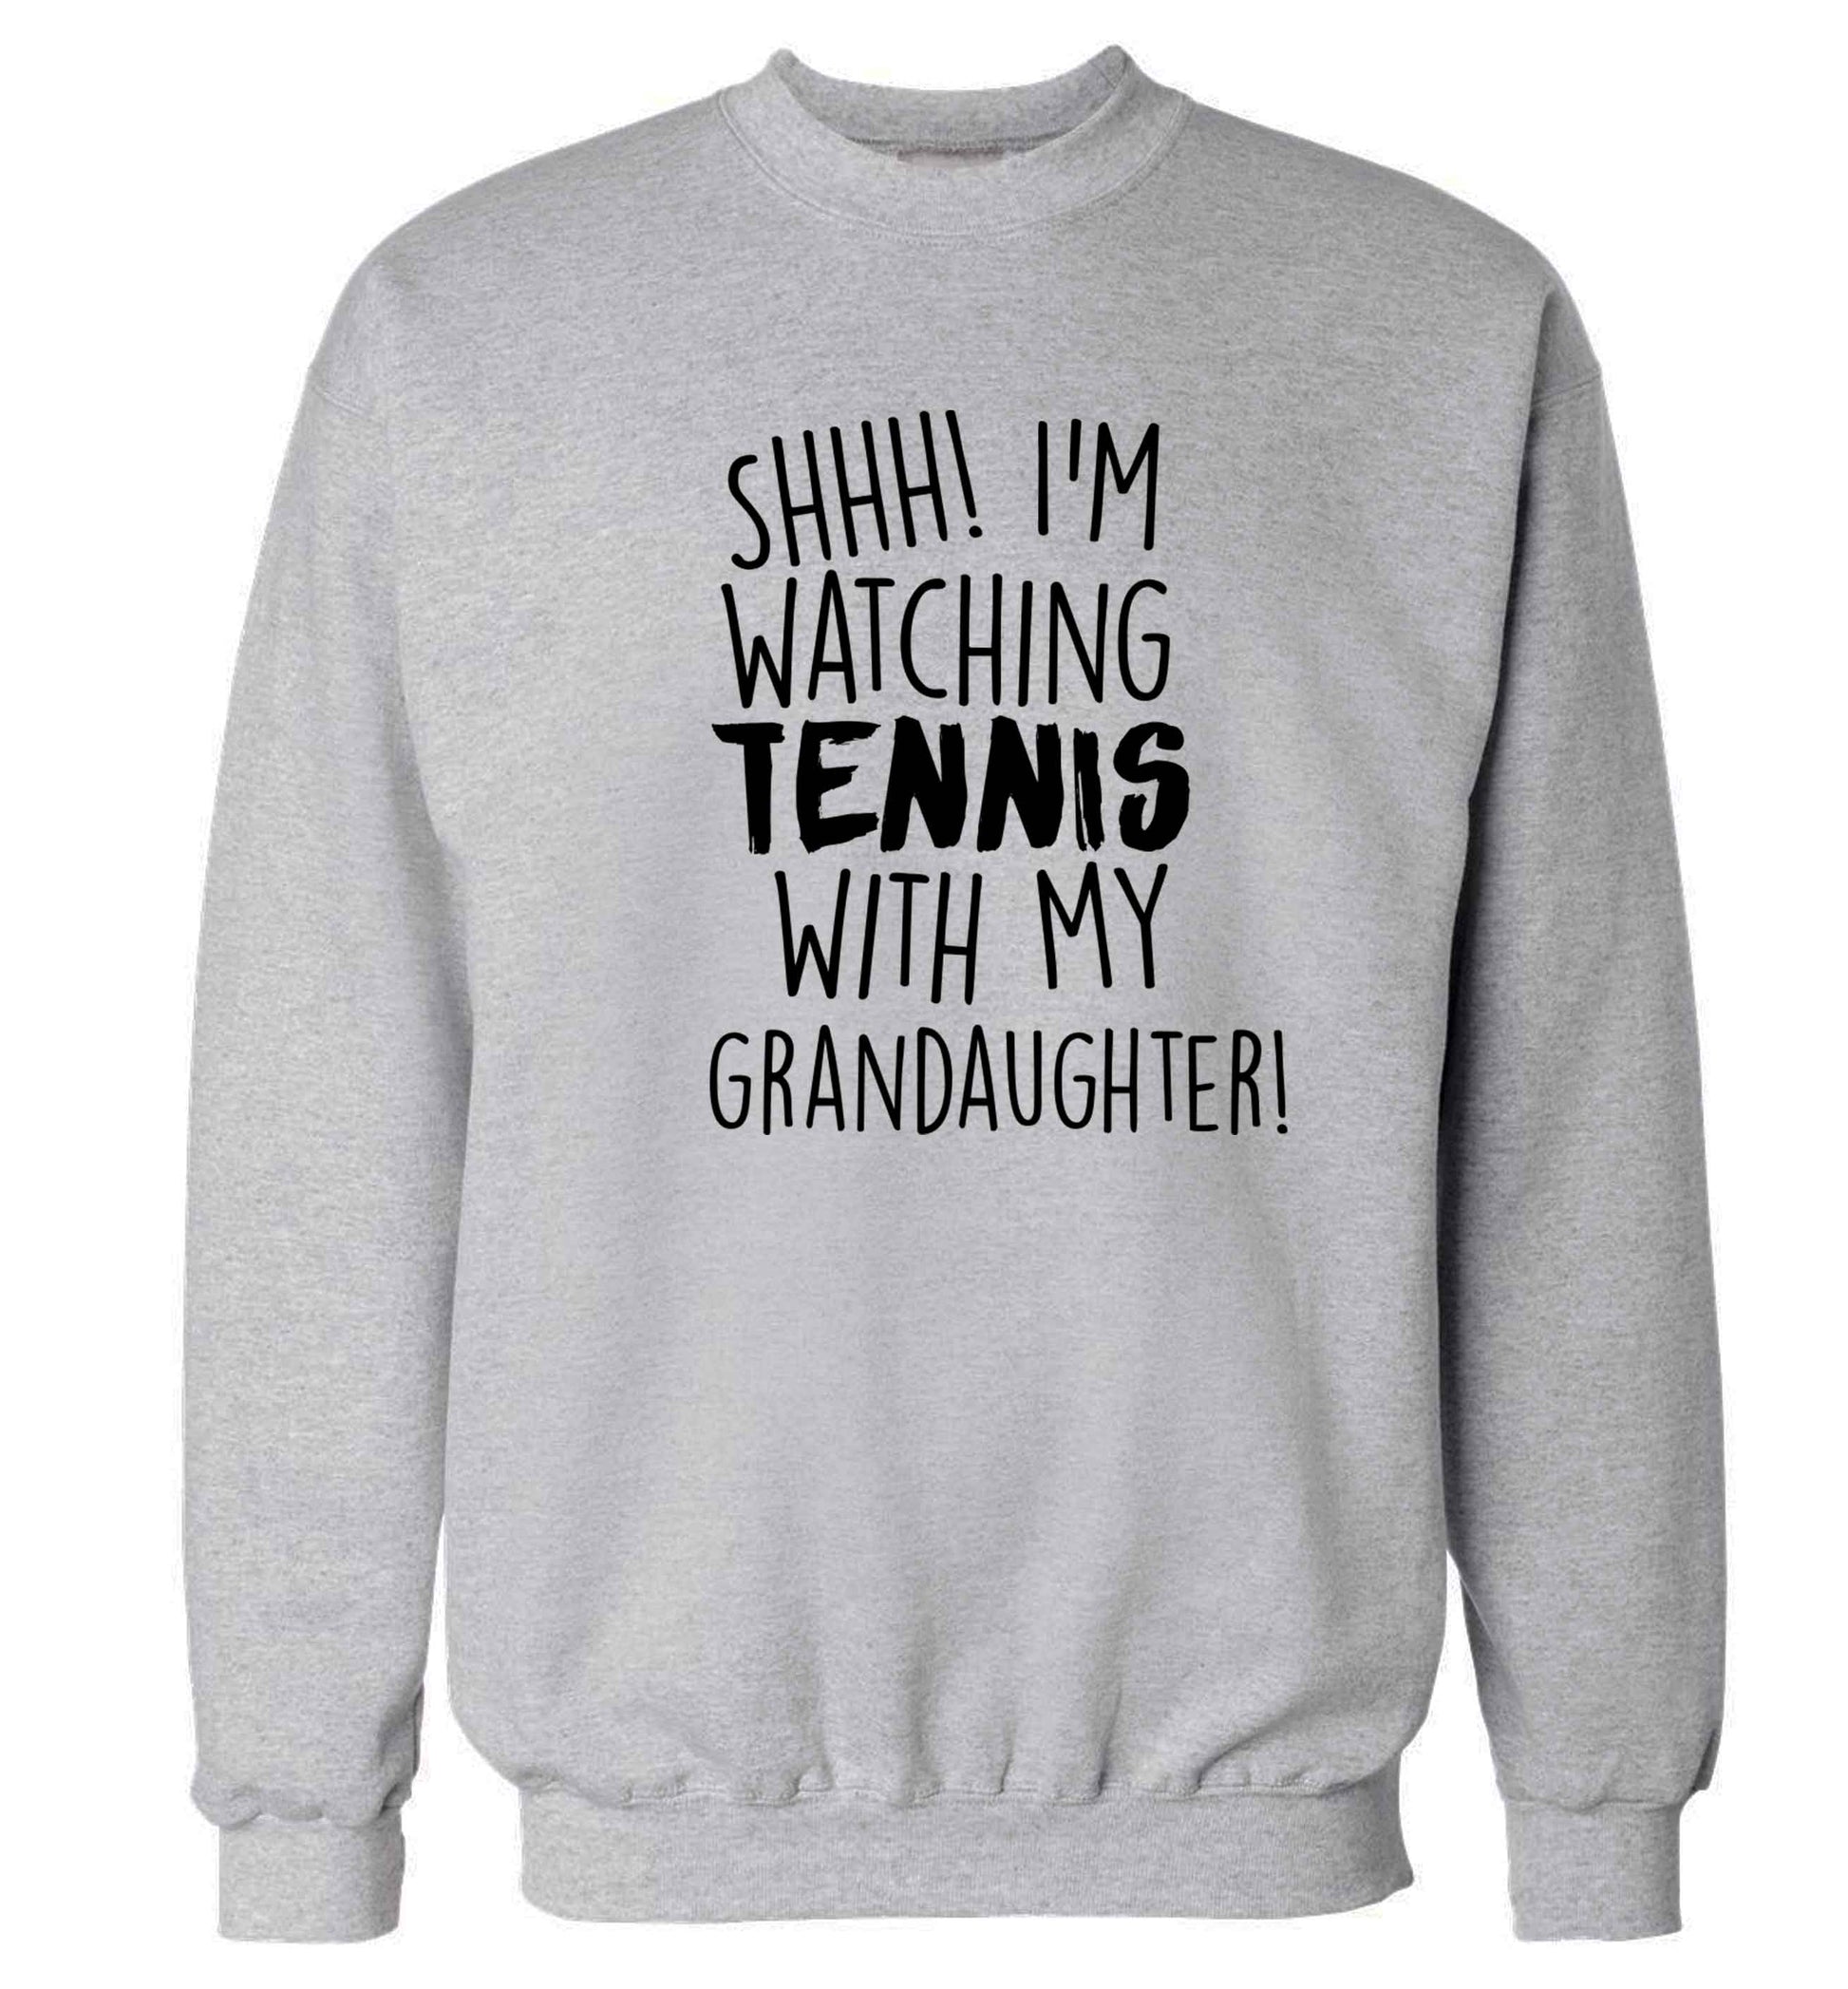 Shh! I'm watching tennis with my granddaughter! Adult's unisex grey Sweater 2XL